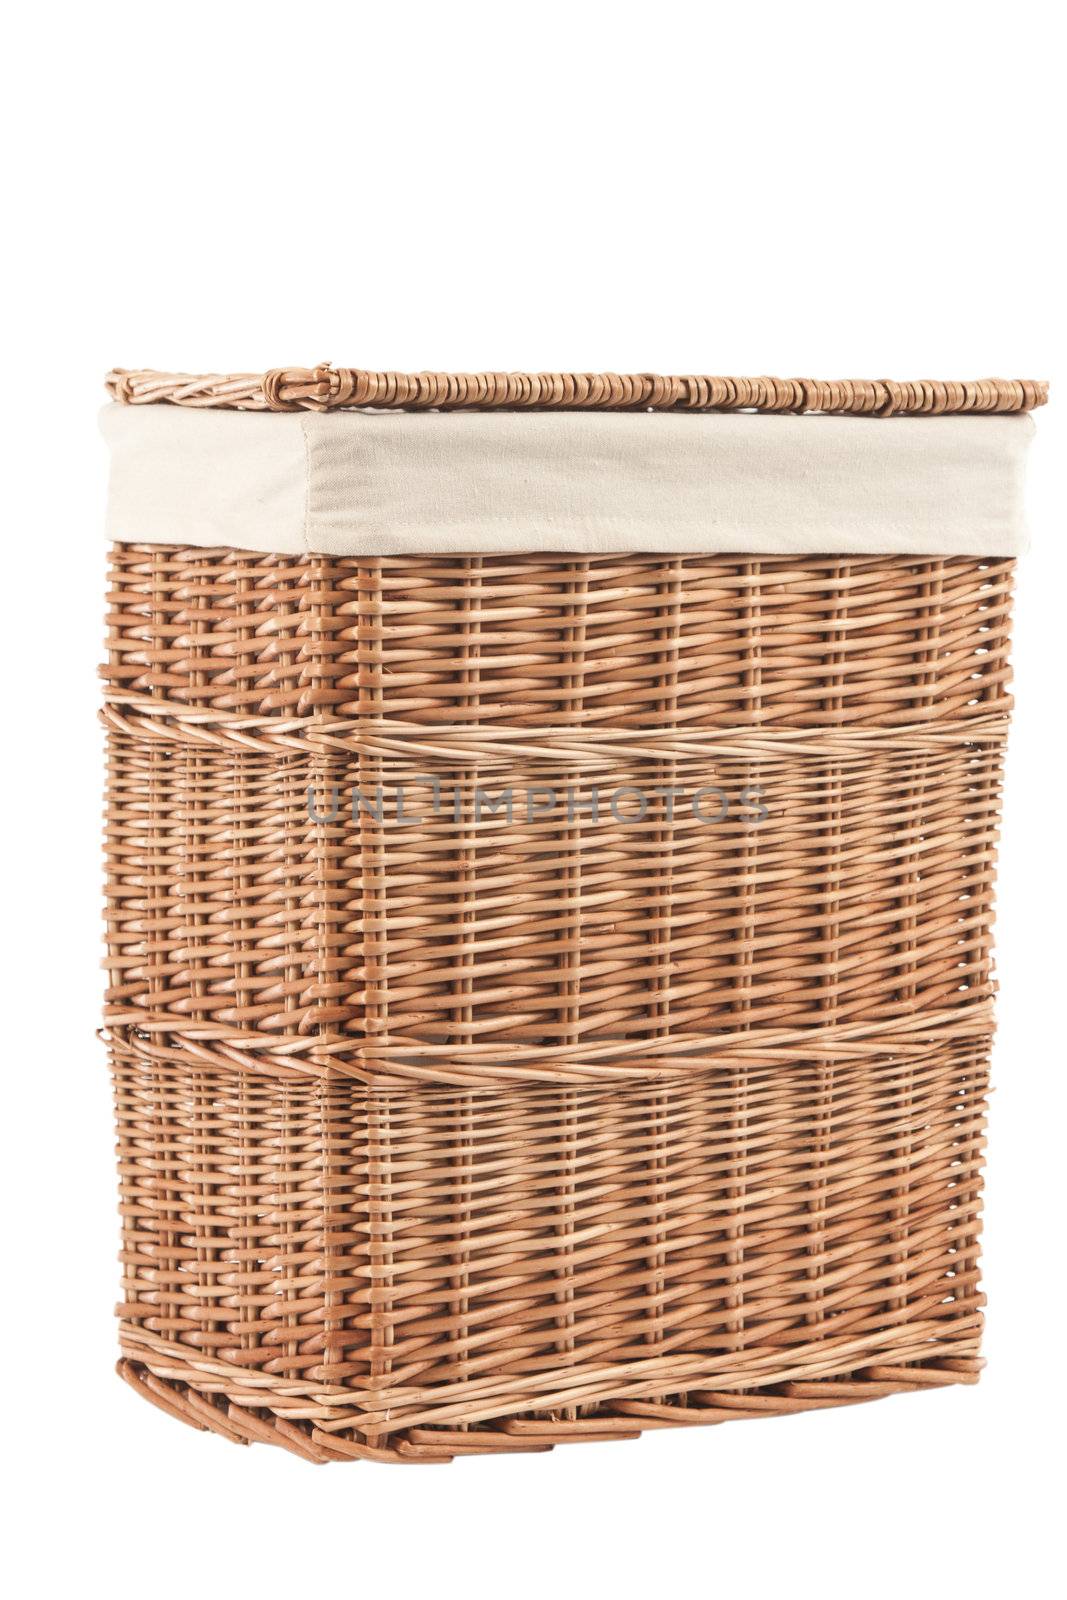 Isolated on white laundry basket made of rattan